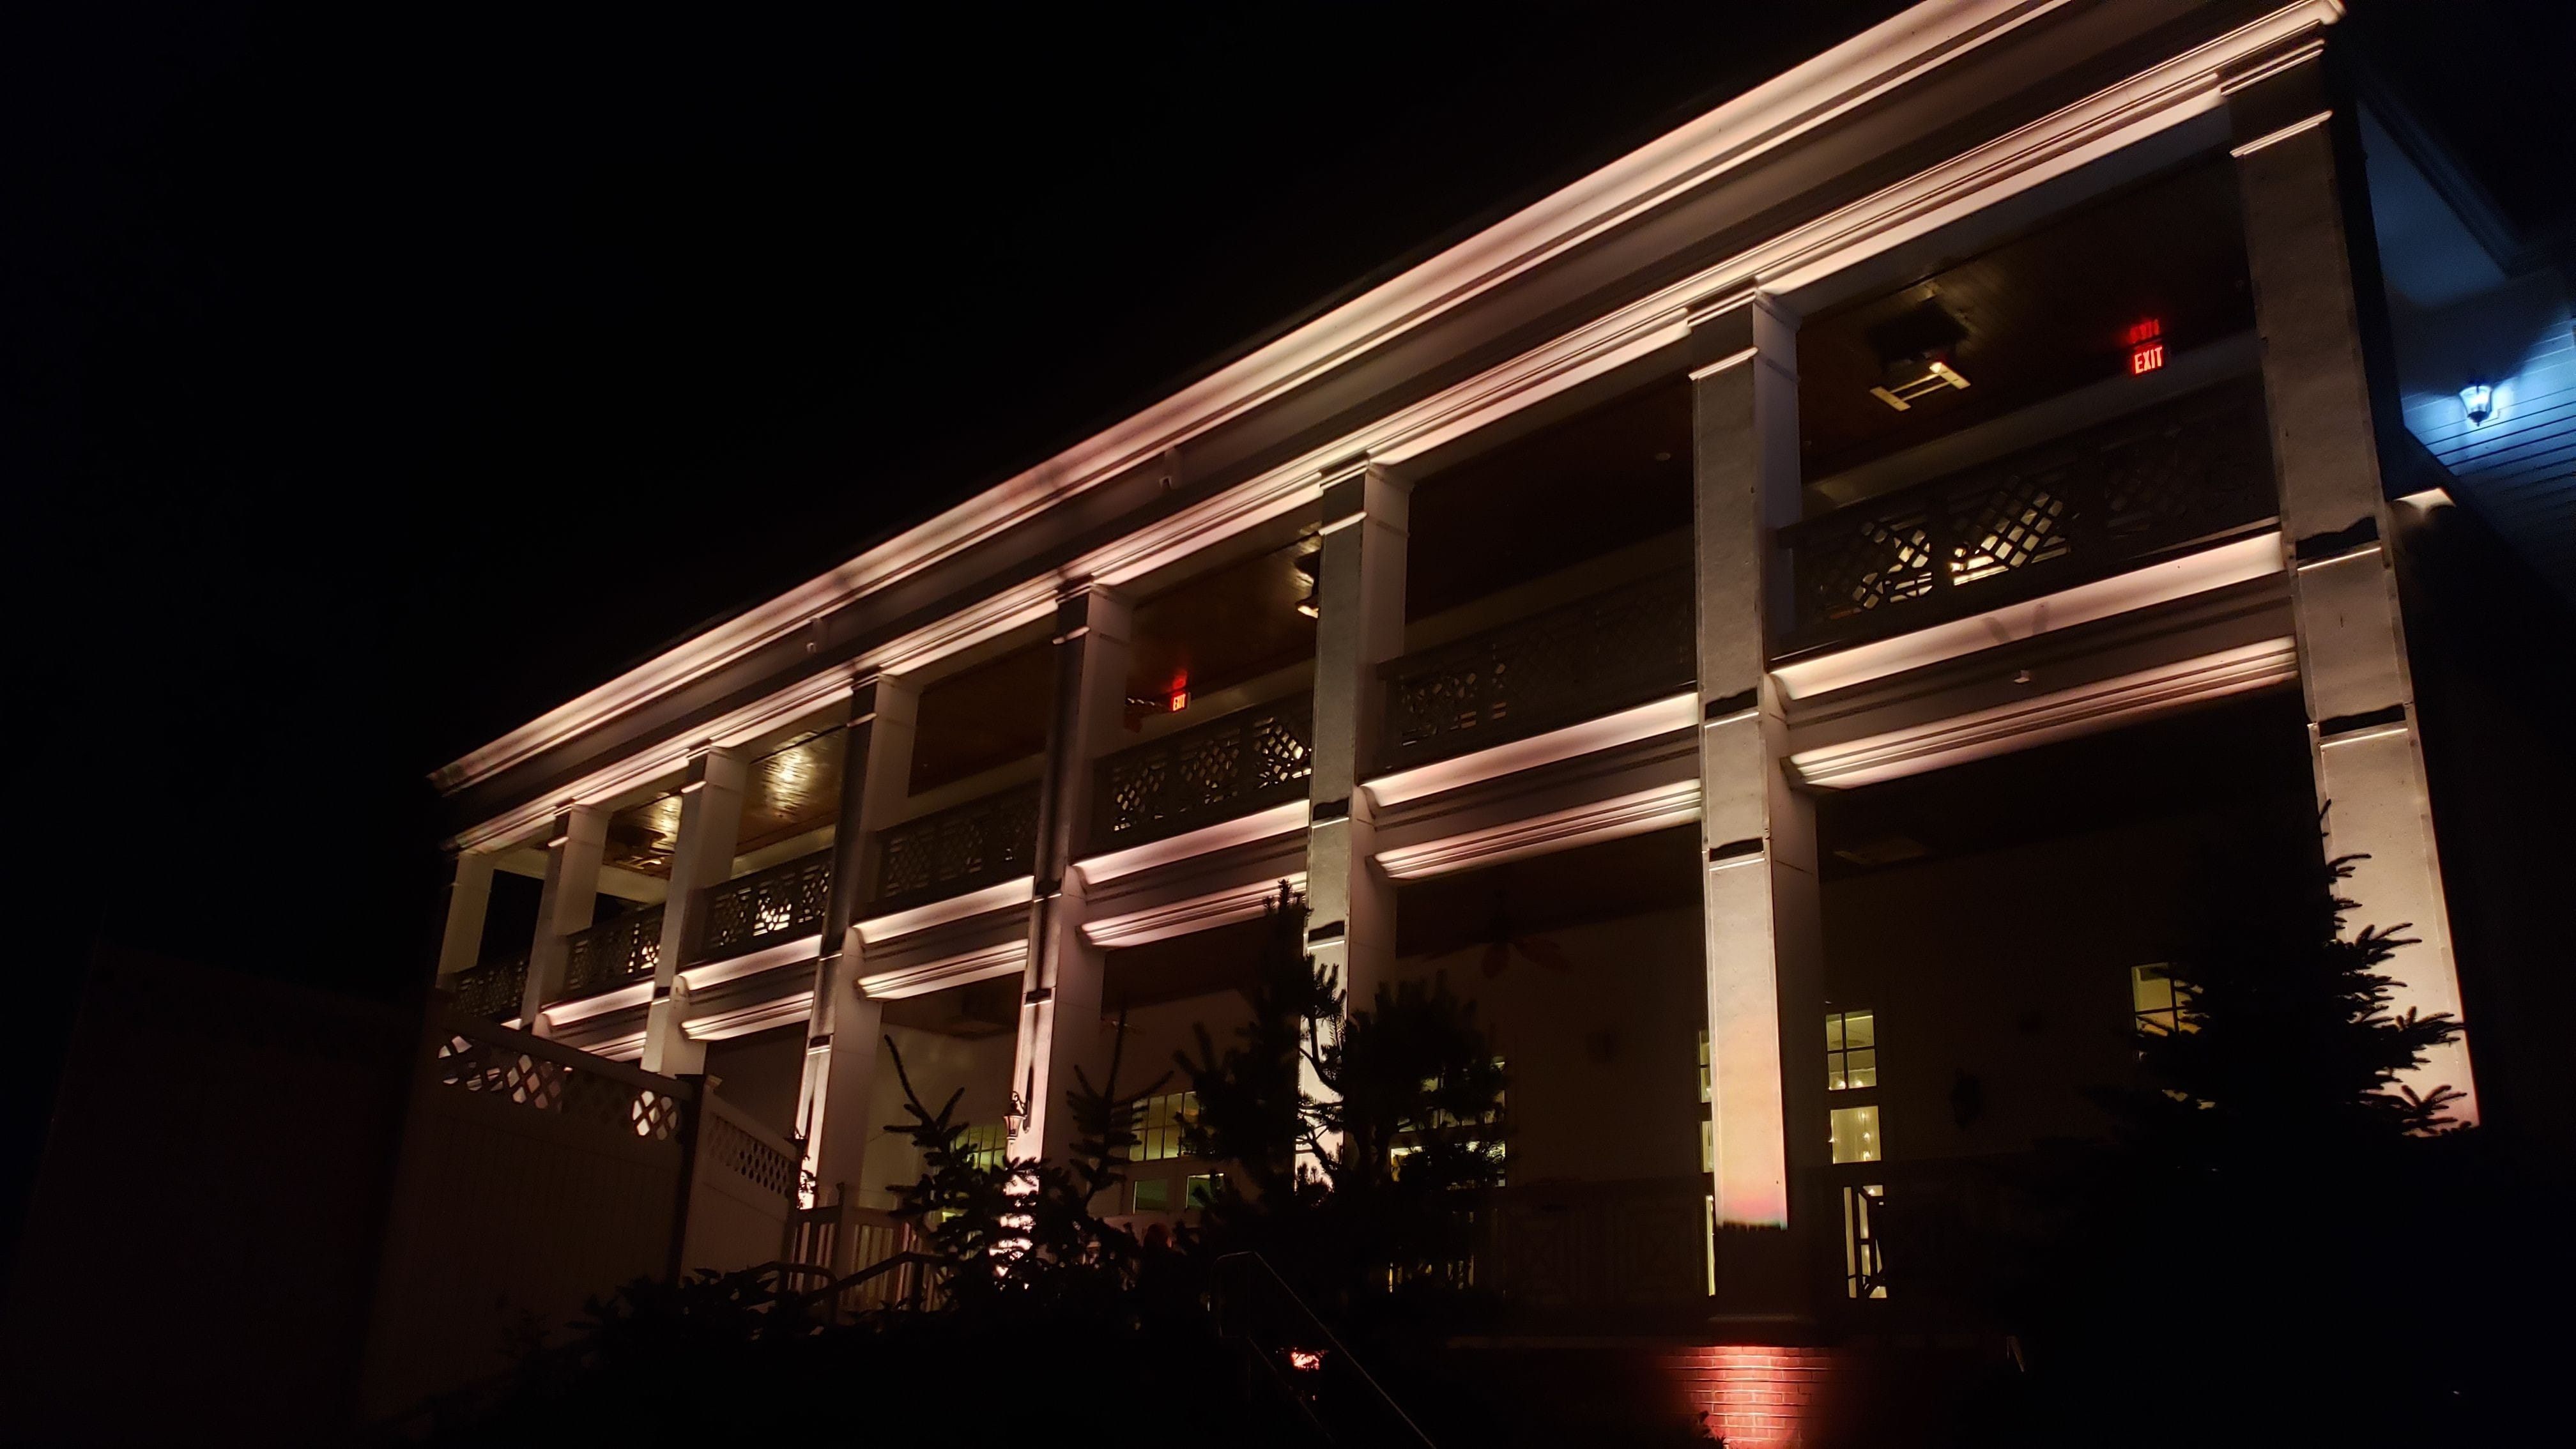 Wedding lighting at the Northland Country Club. Outdoor building lighting in warm white.